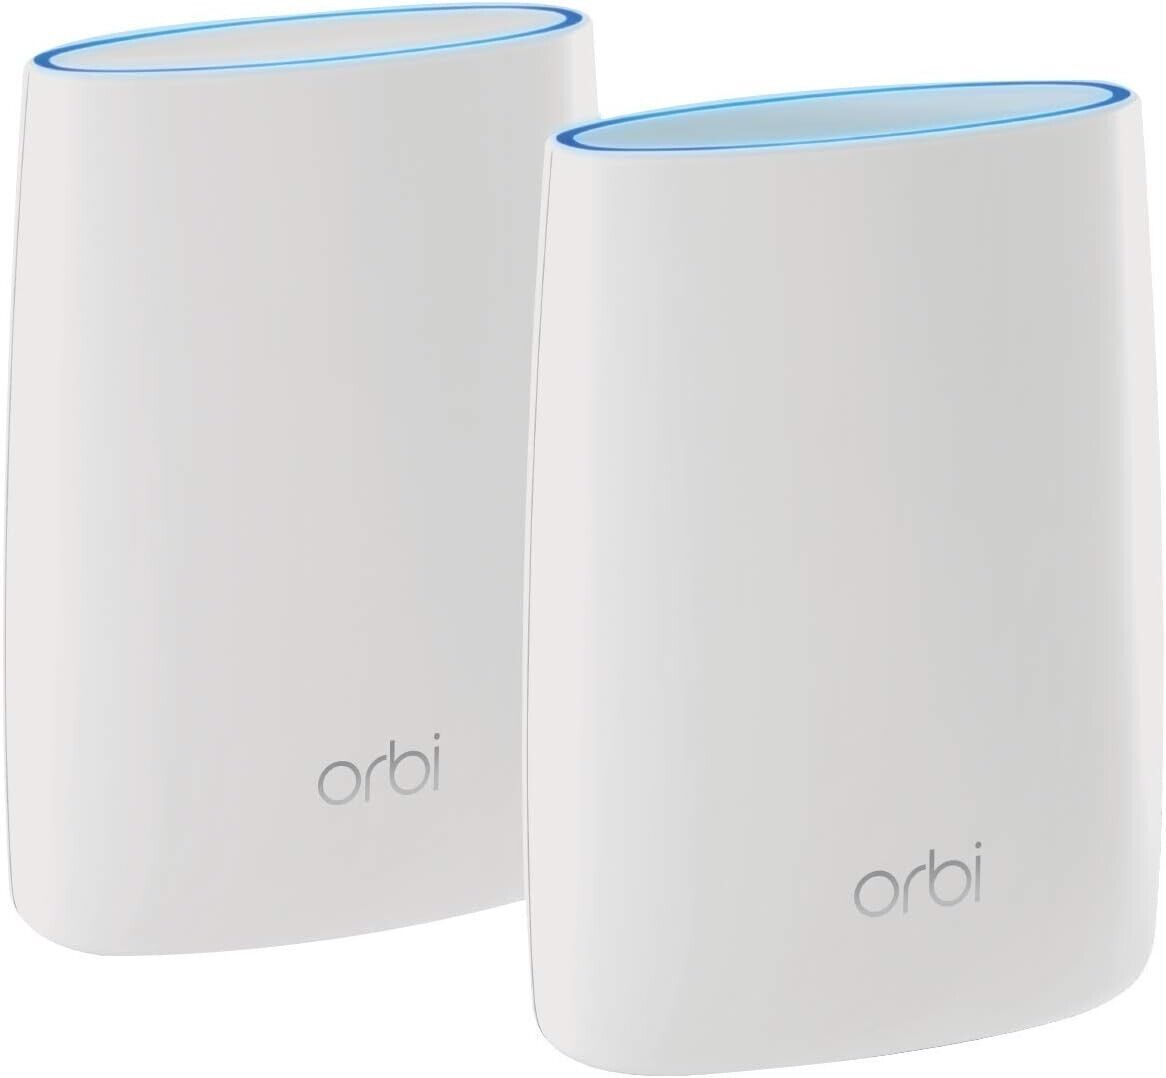 NETGEAR Orbi AC3000 Tri-Band Mesh Wi-Fi System (2-pack) RBK50 With Power Cords